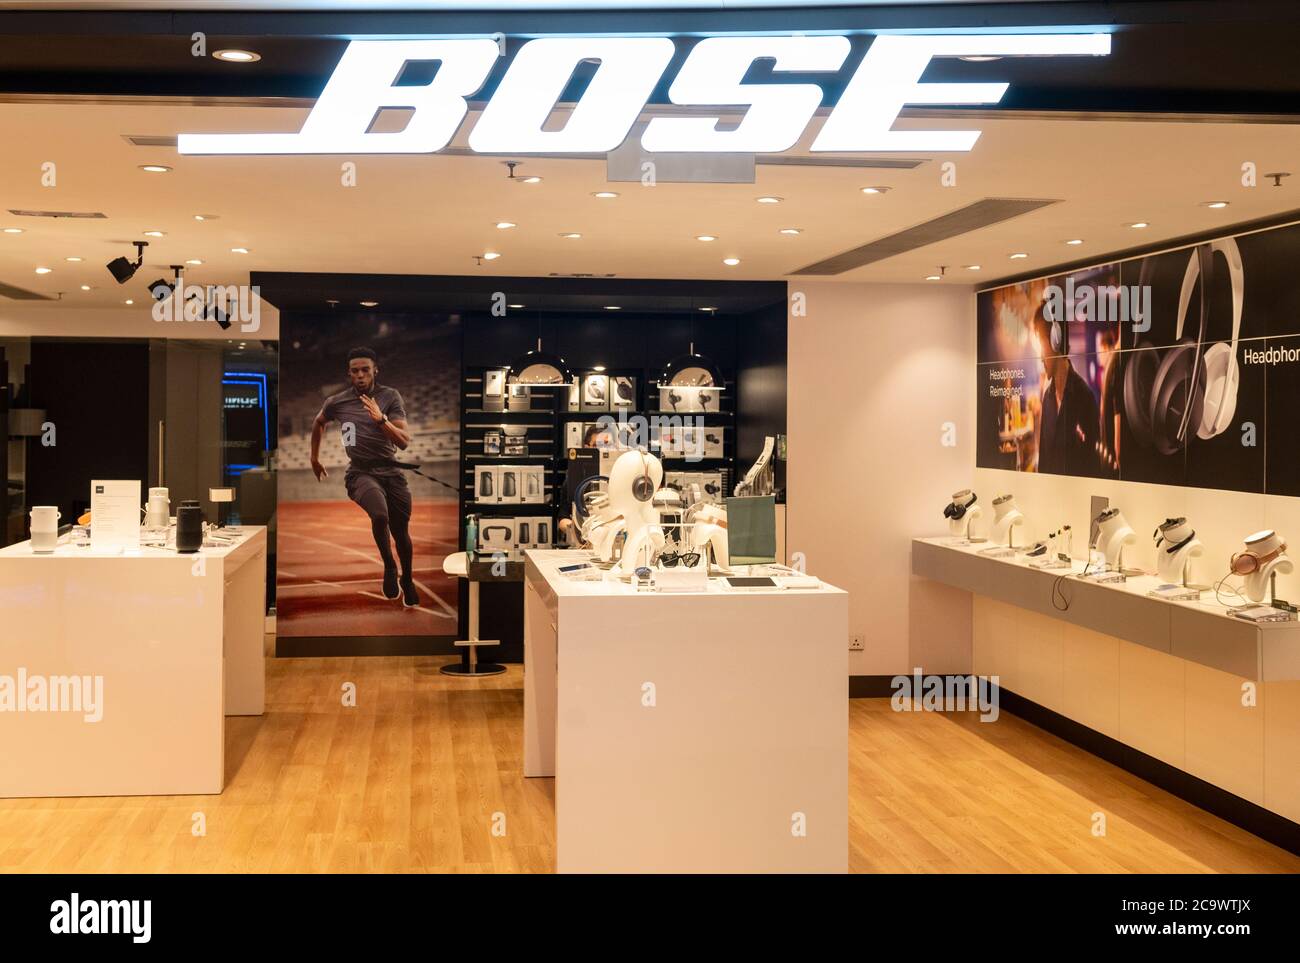 American audio products brand, Bose store seen in Hong Kong Stock Photo -  Alamy